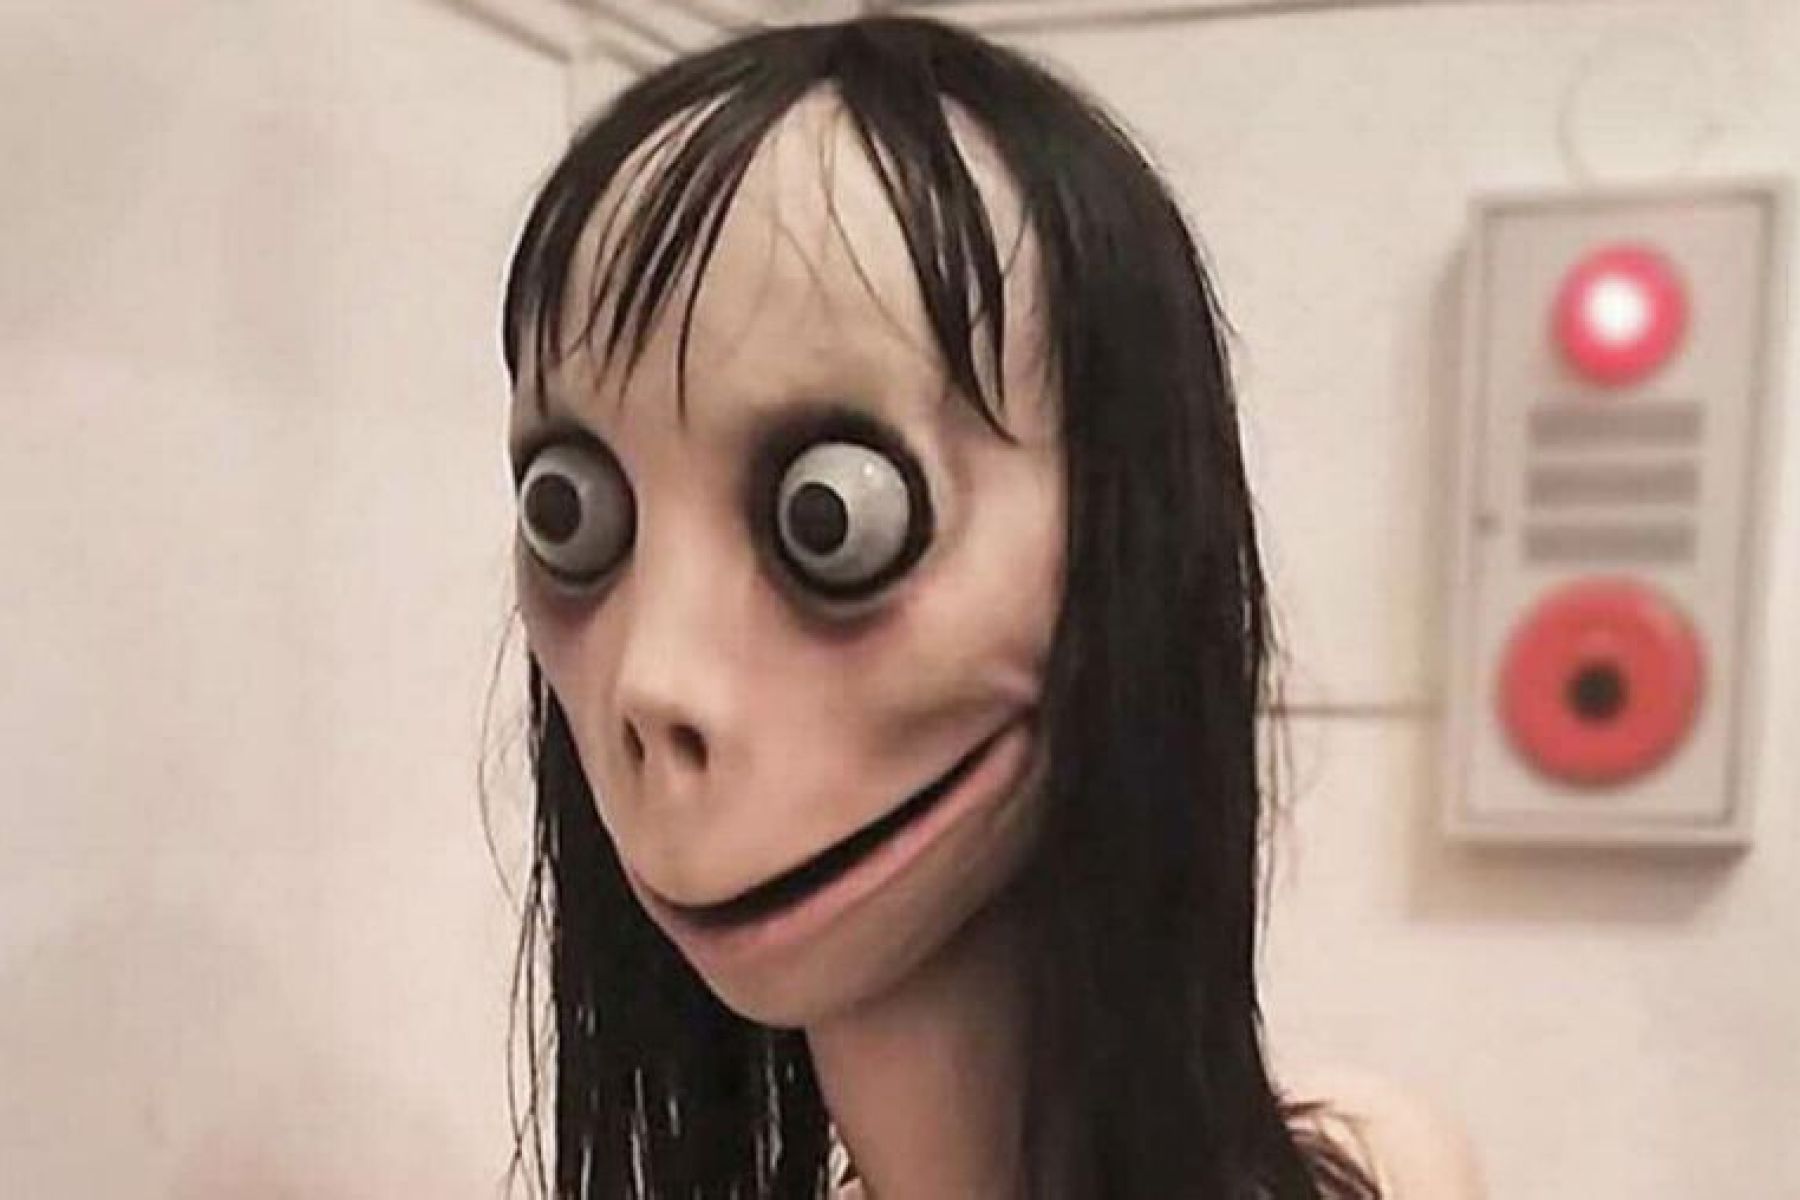 Momo Challenge: Why Parents Are Freaking Over This New 'Game